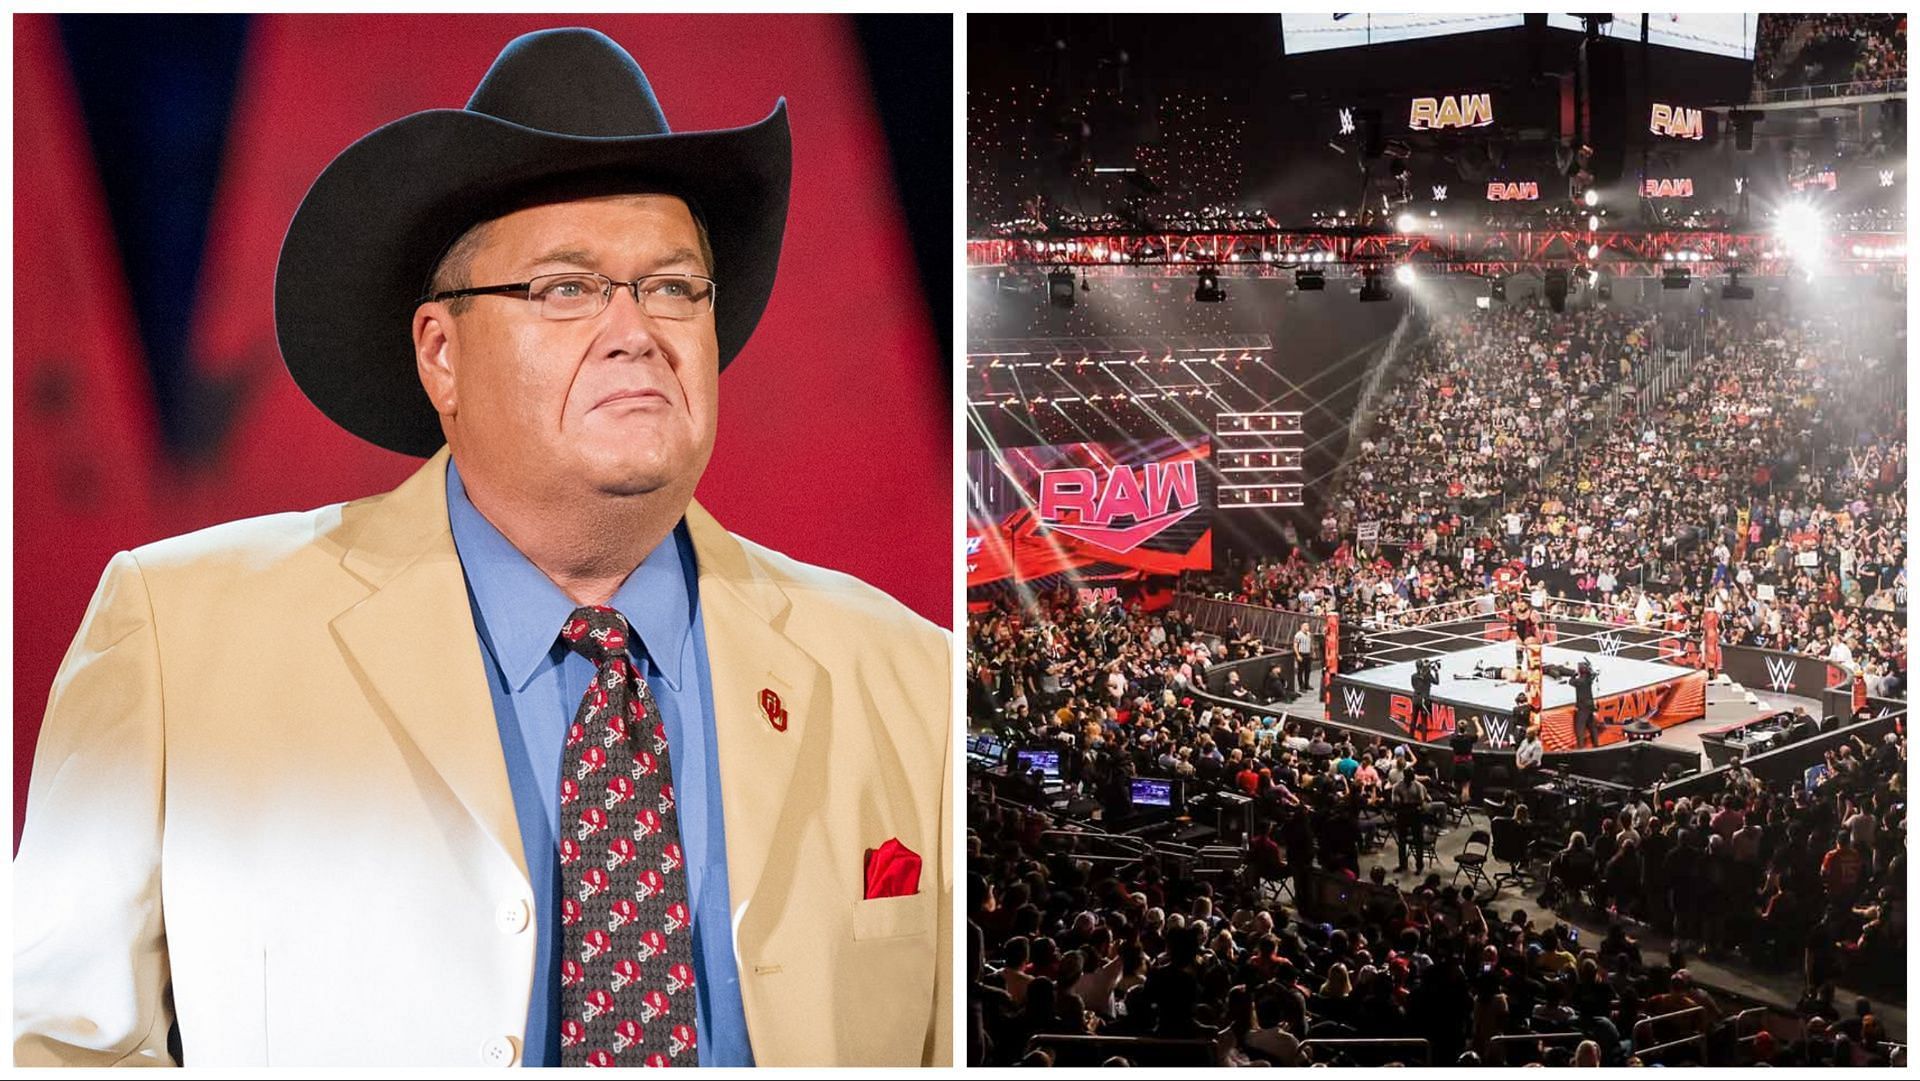 Jim Ross returns to WWE RAW, the WWE Universe packs local arena for RAW